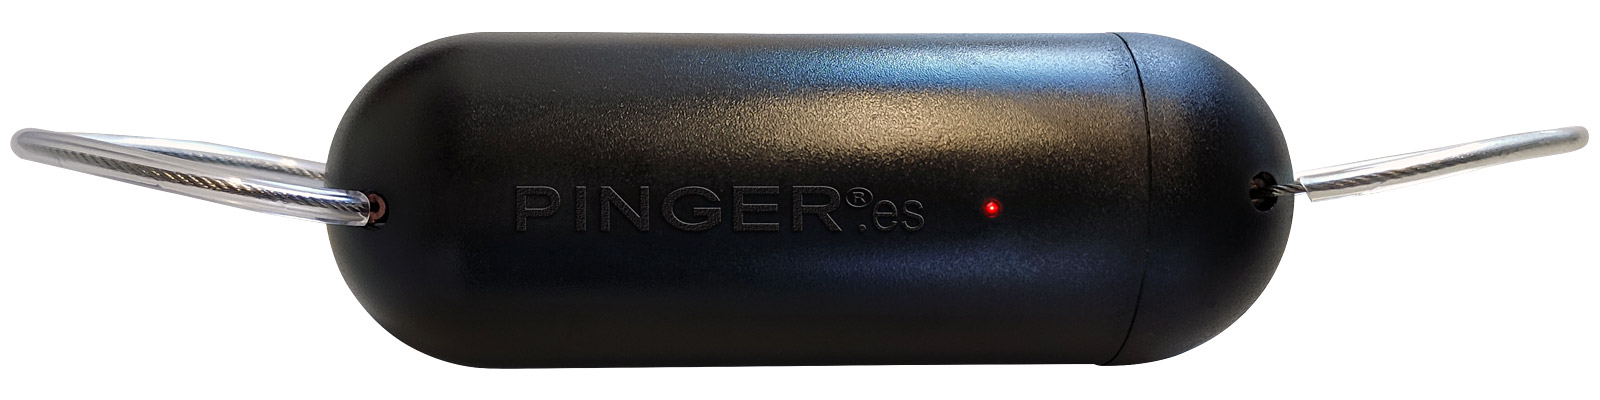 Product Pinger 01